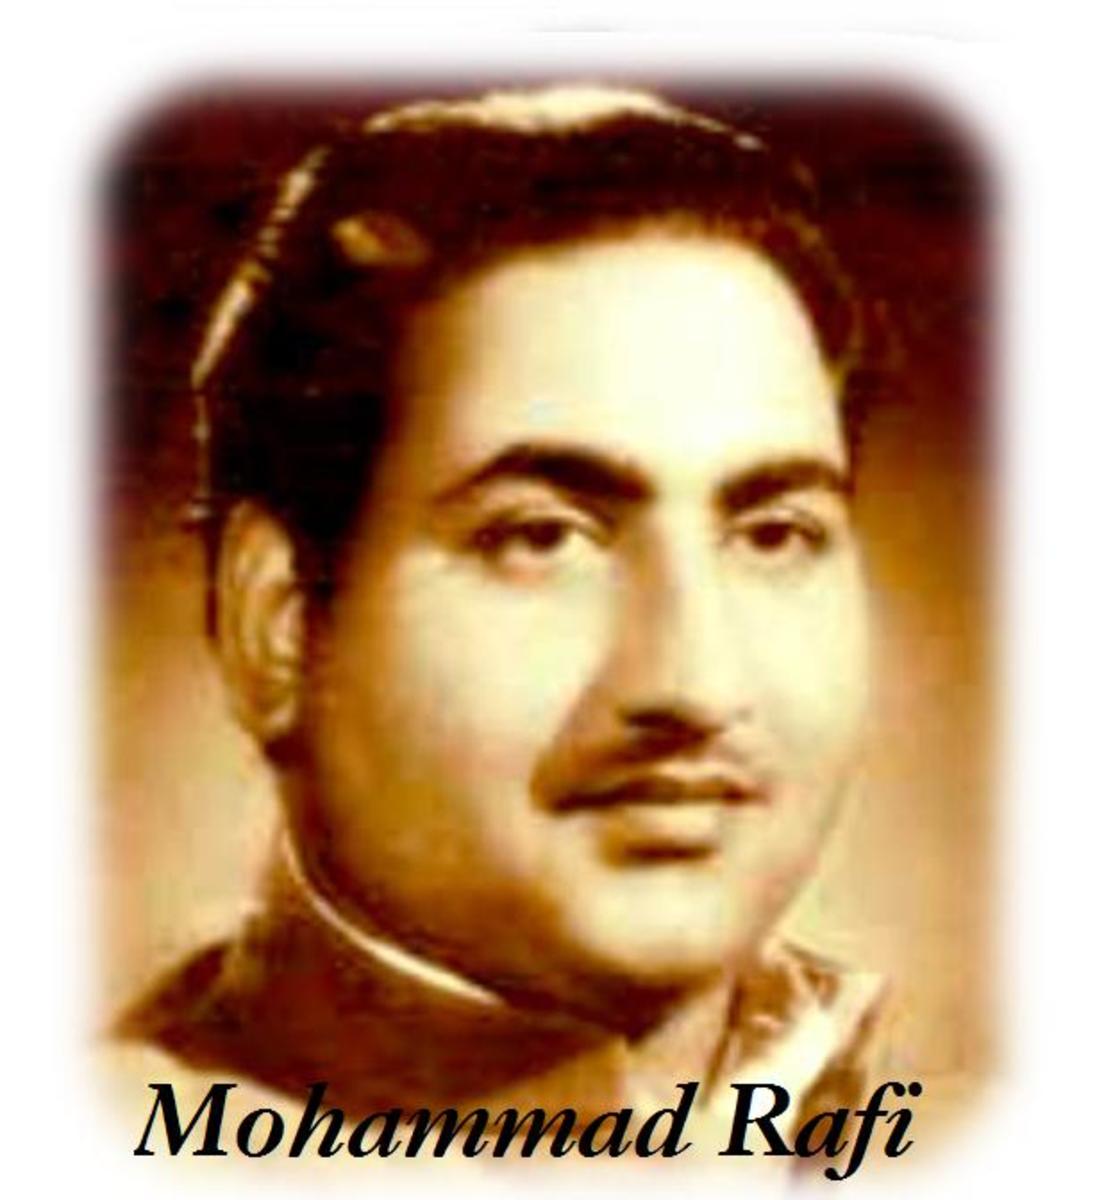 Mohammad Rafi - Not just the master of classical music, he brought improvisation and acting into Bollywood music